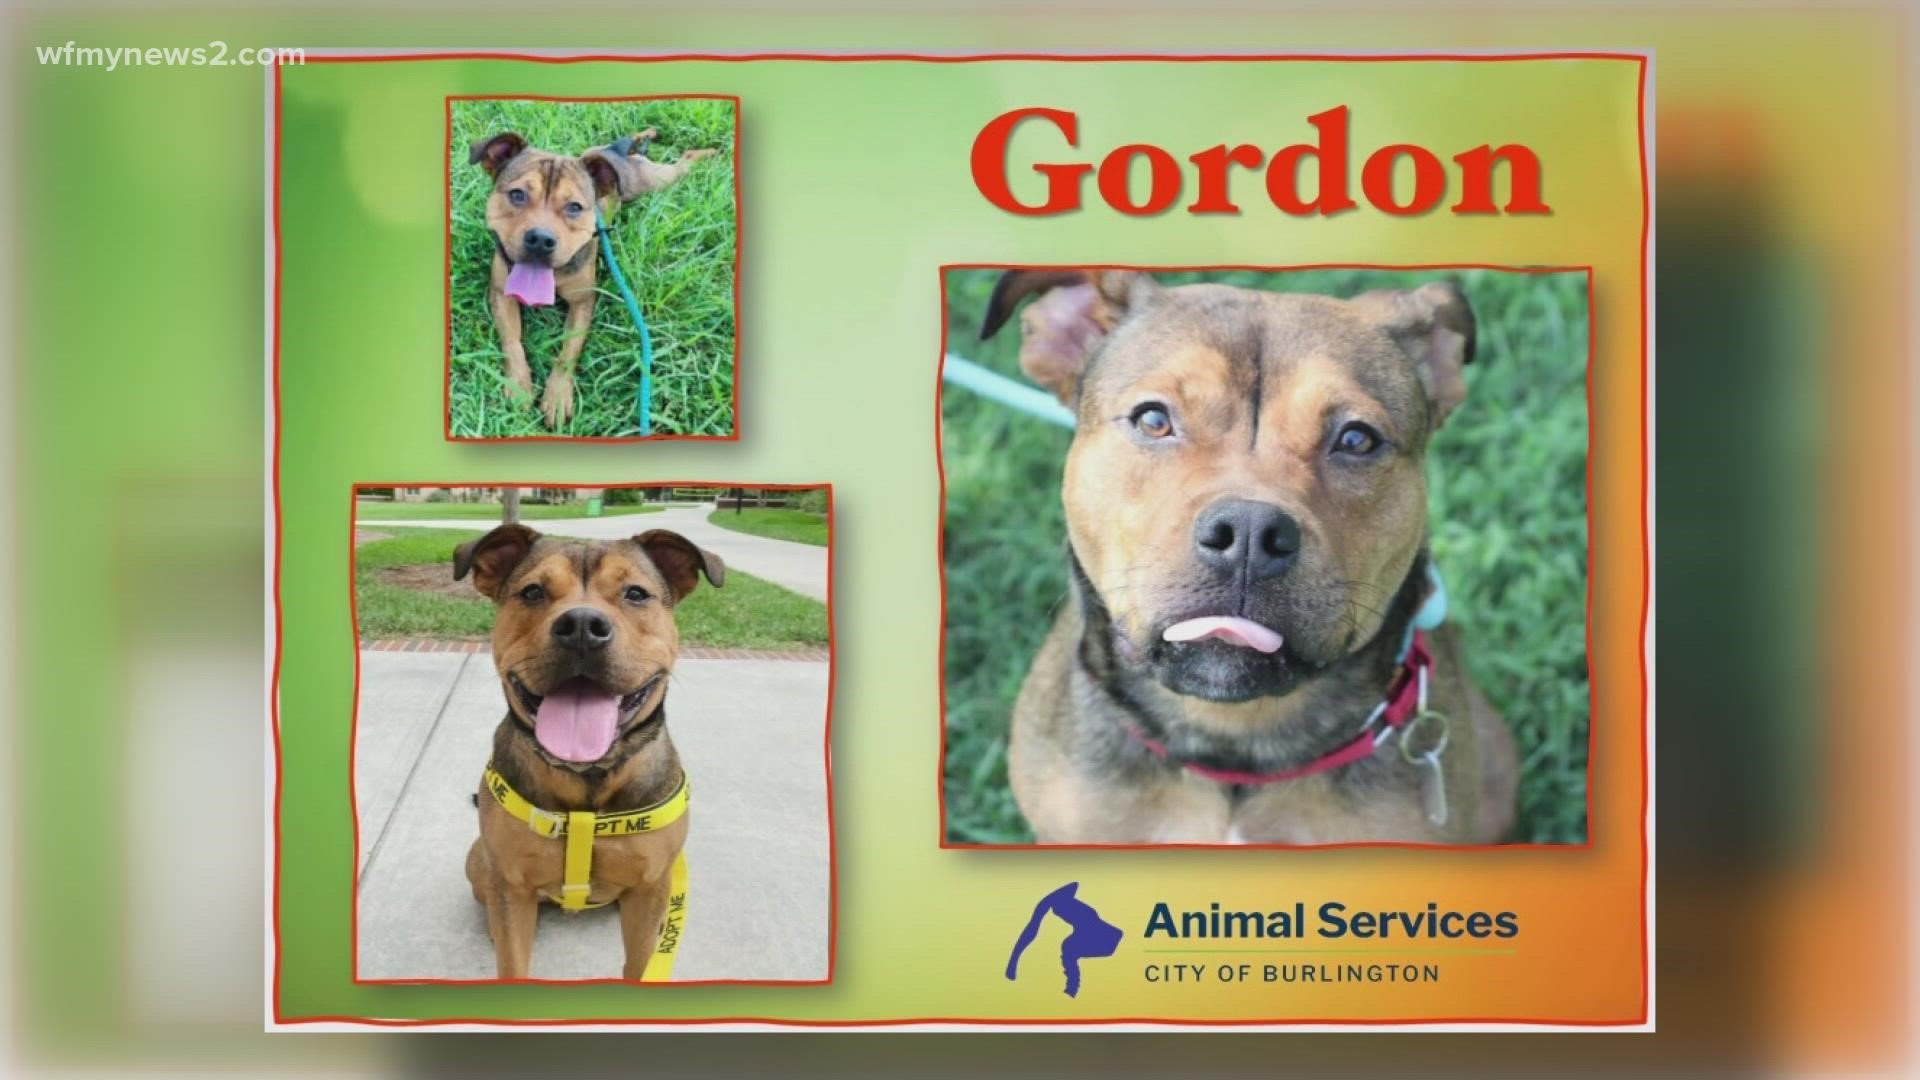 Let's get Gordon adopted!